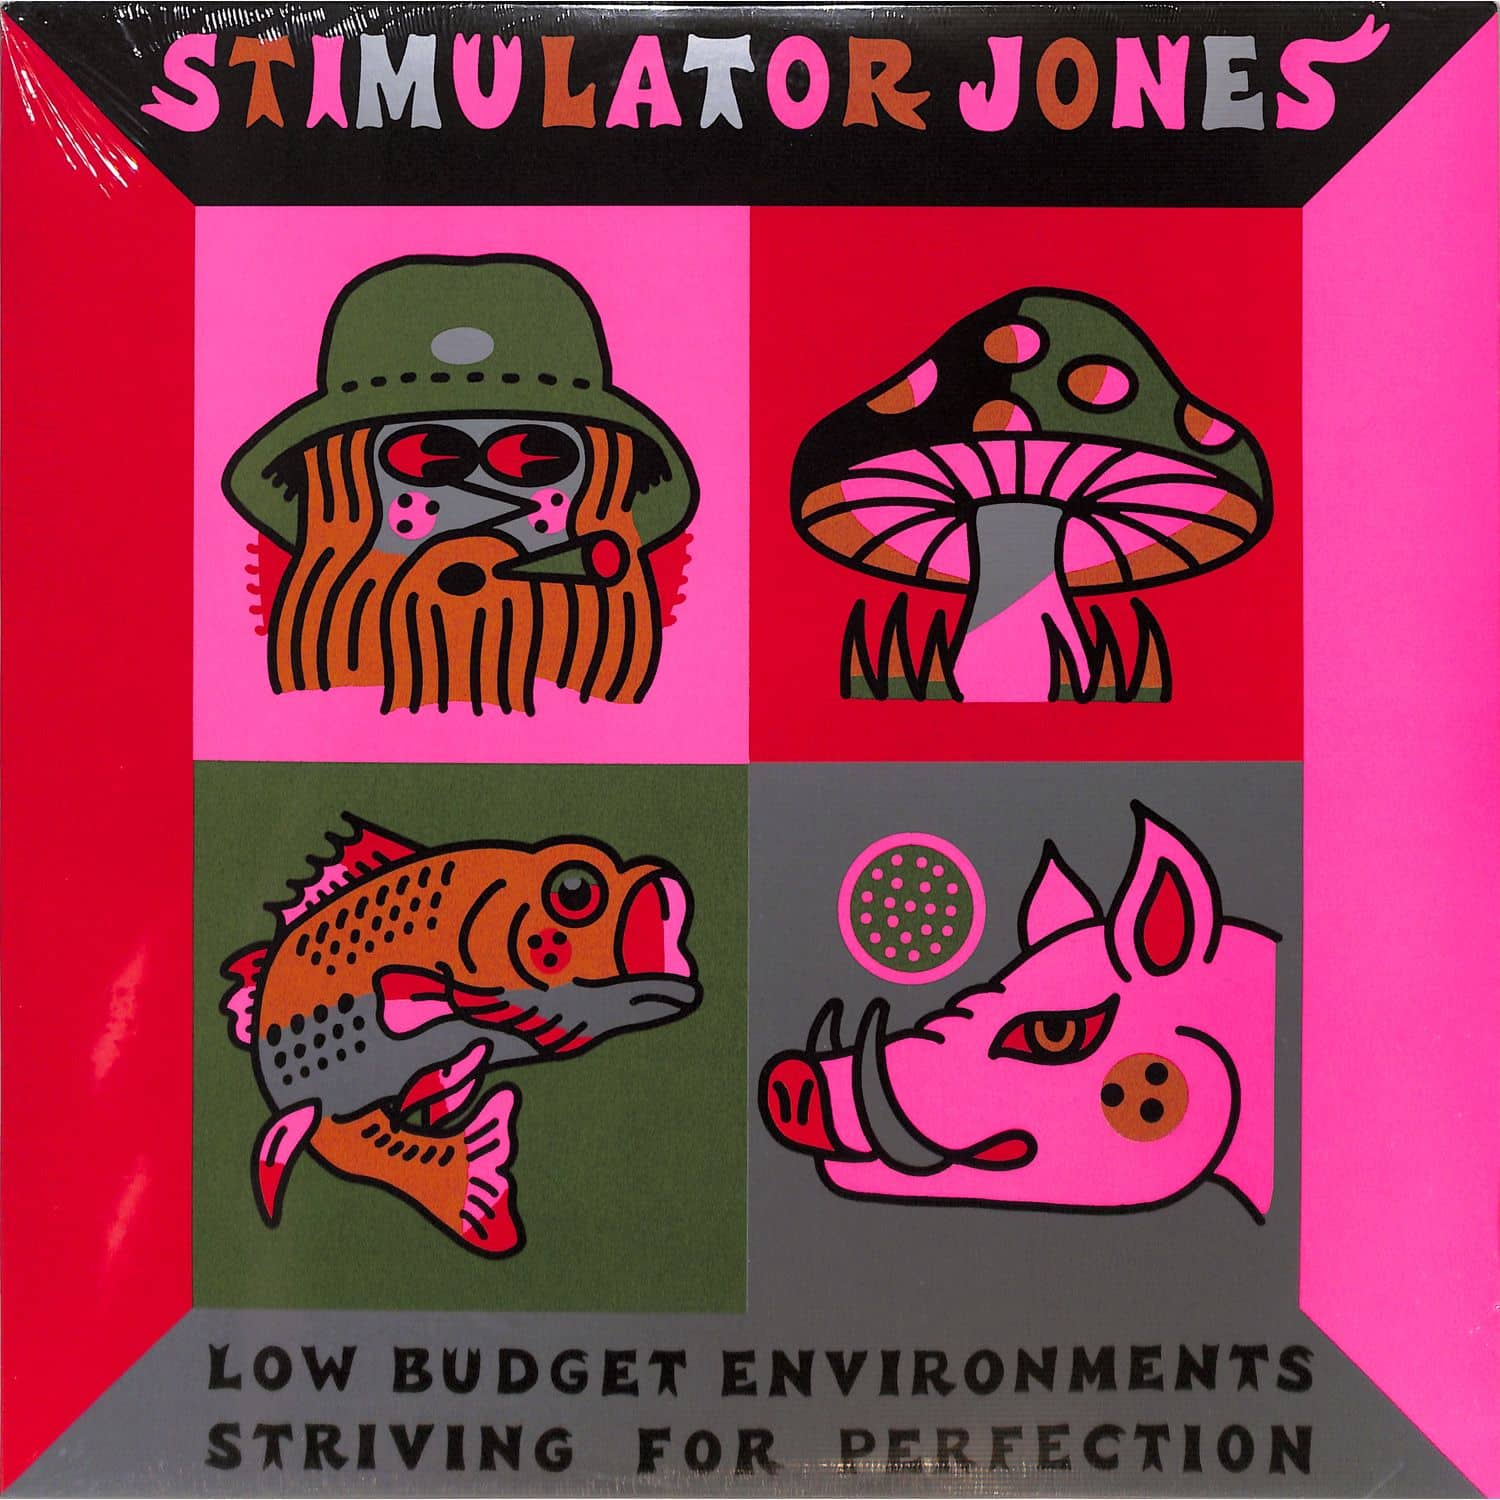 Stimulator Jones - LOW BUDGET ENVIRONMENTS STRIVING FOR PERFECTION